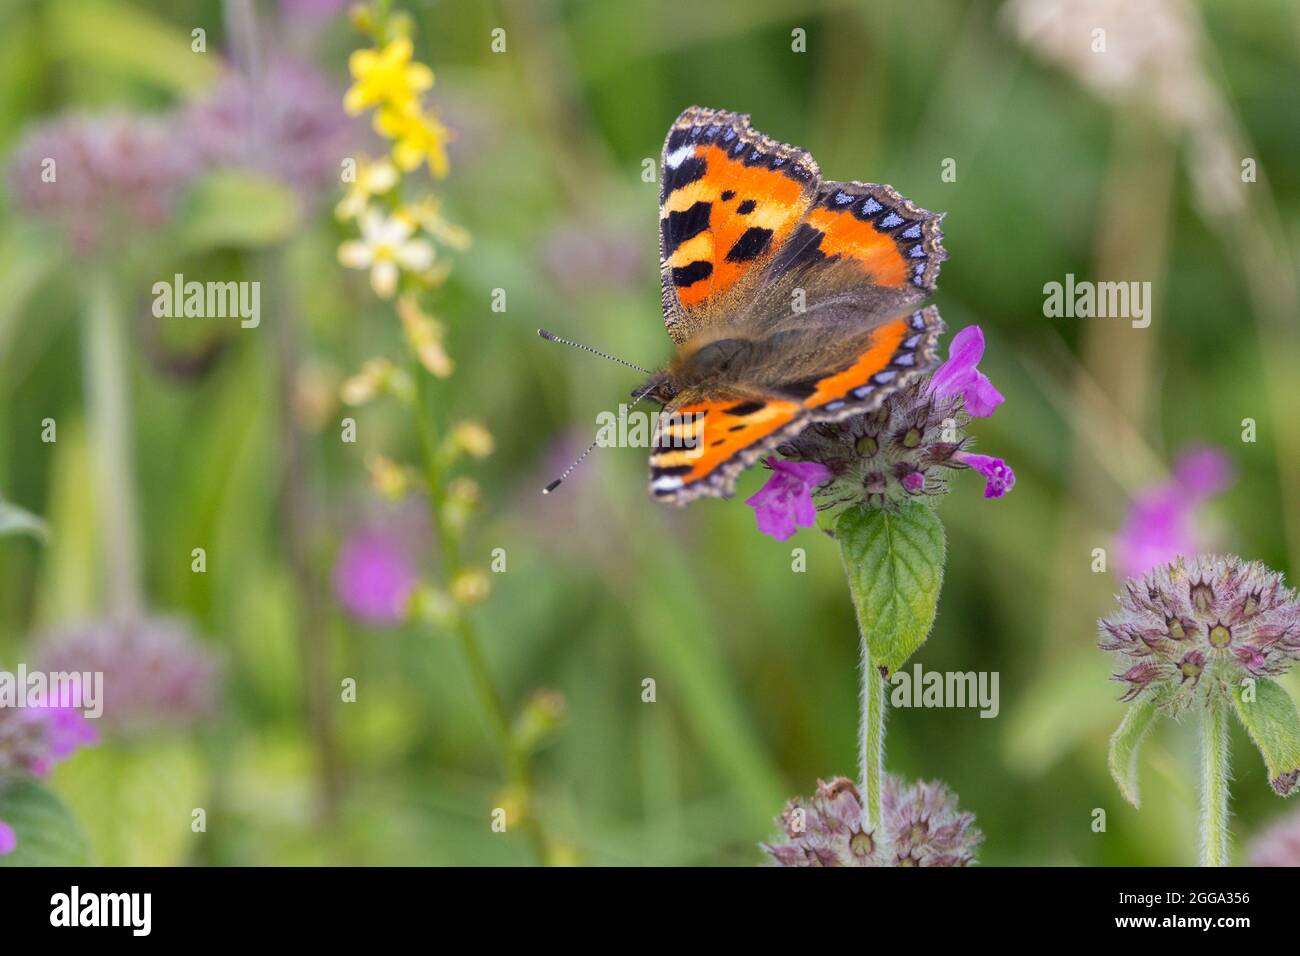 Small tortoiseshell butterfly (Aglais urticae) upperwings marbled orange yellow and black with blue half moons on rear edges smoky  brown underwings Stock Photo